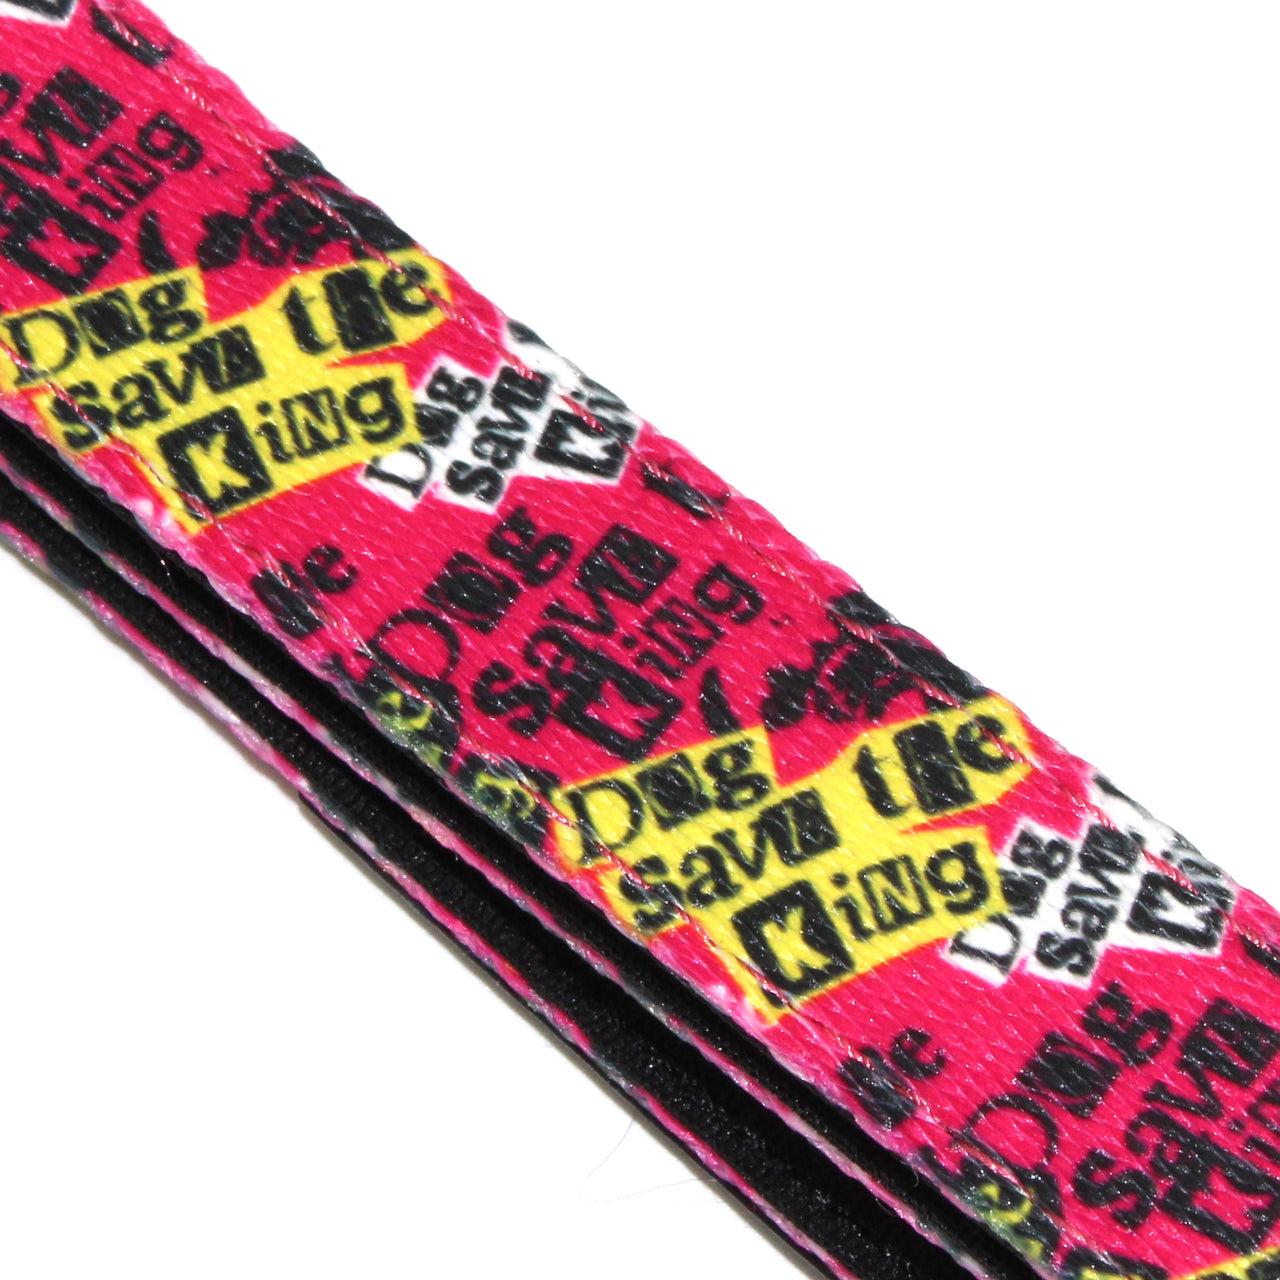 Topdog Dog Save The King – Matching lead